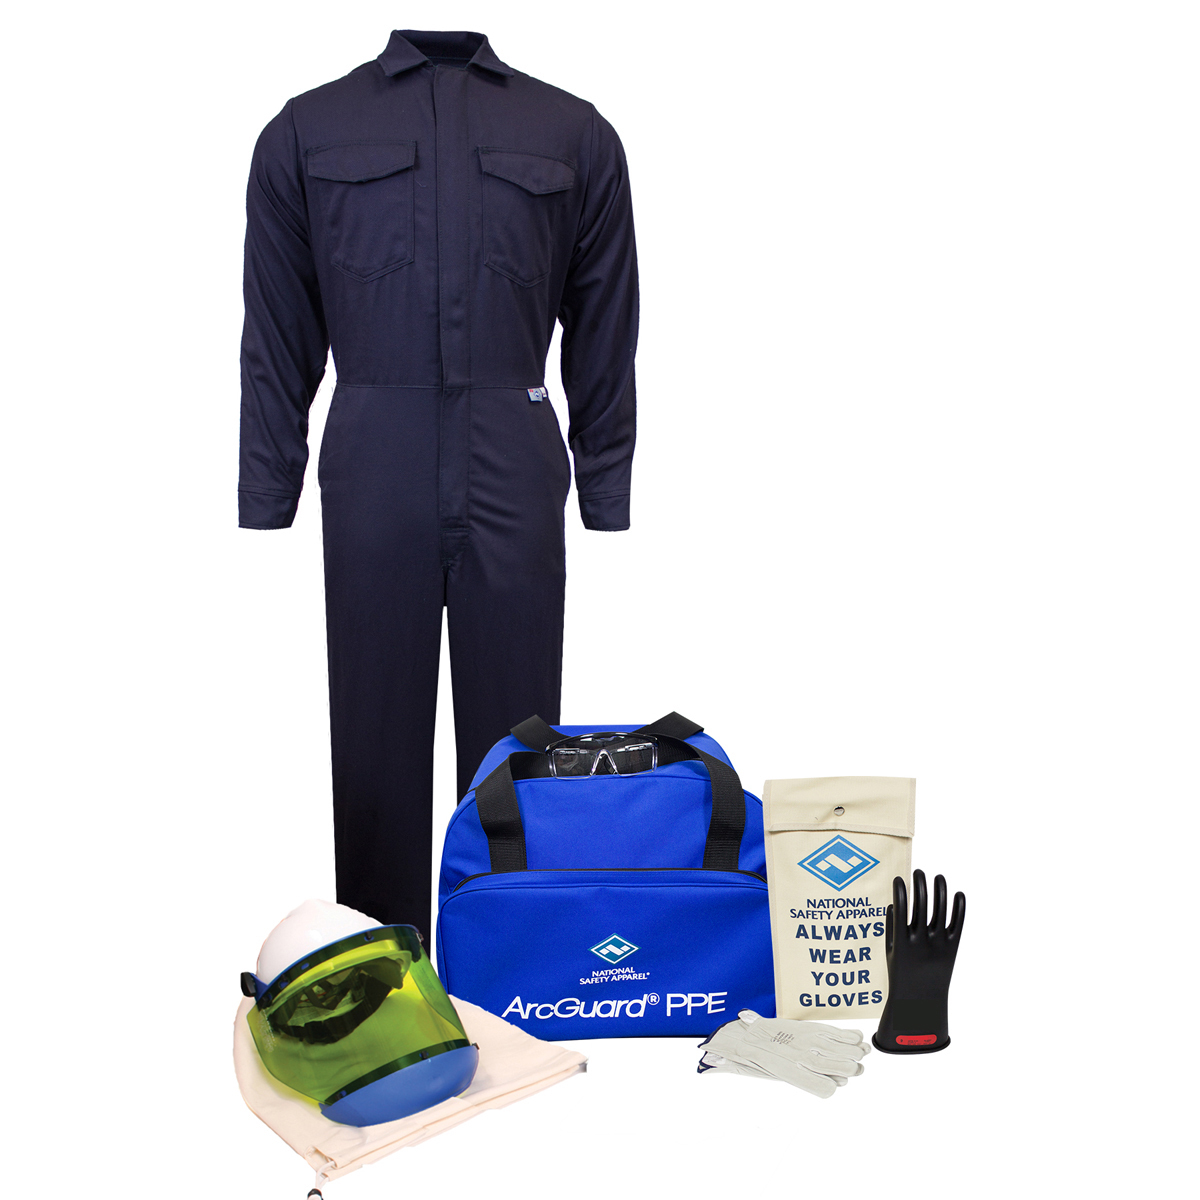 National Safety Apparel Medium Navy Westex UltraSoft® ArcGuard® Flame Resistant Arc Flash Personal Protective Equipment Kit With